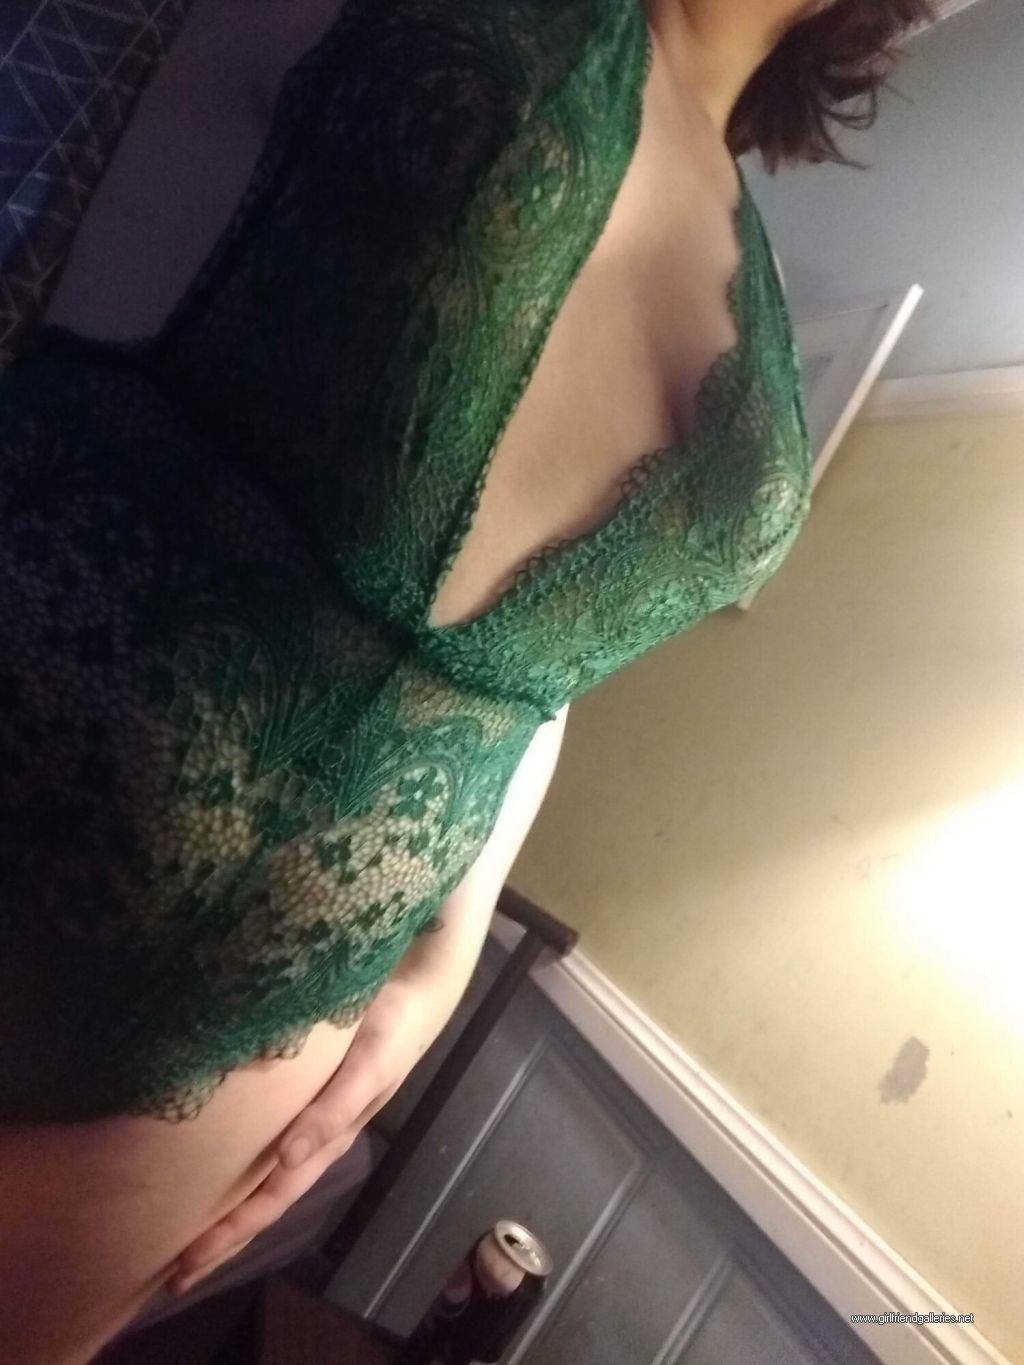 Green lace ;)